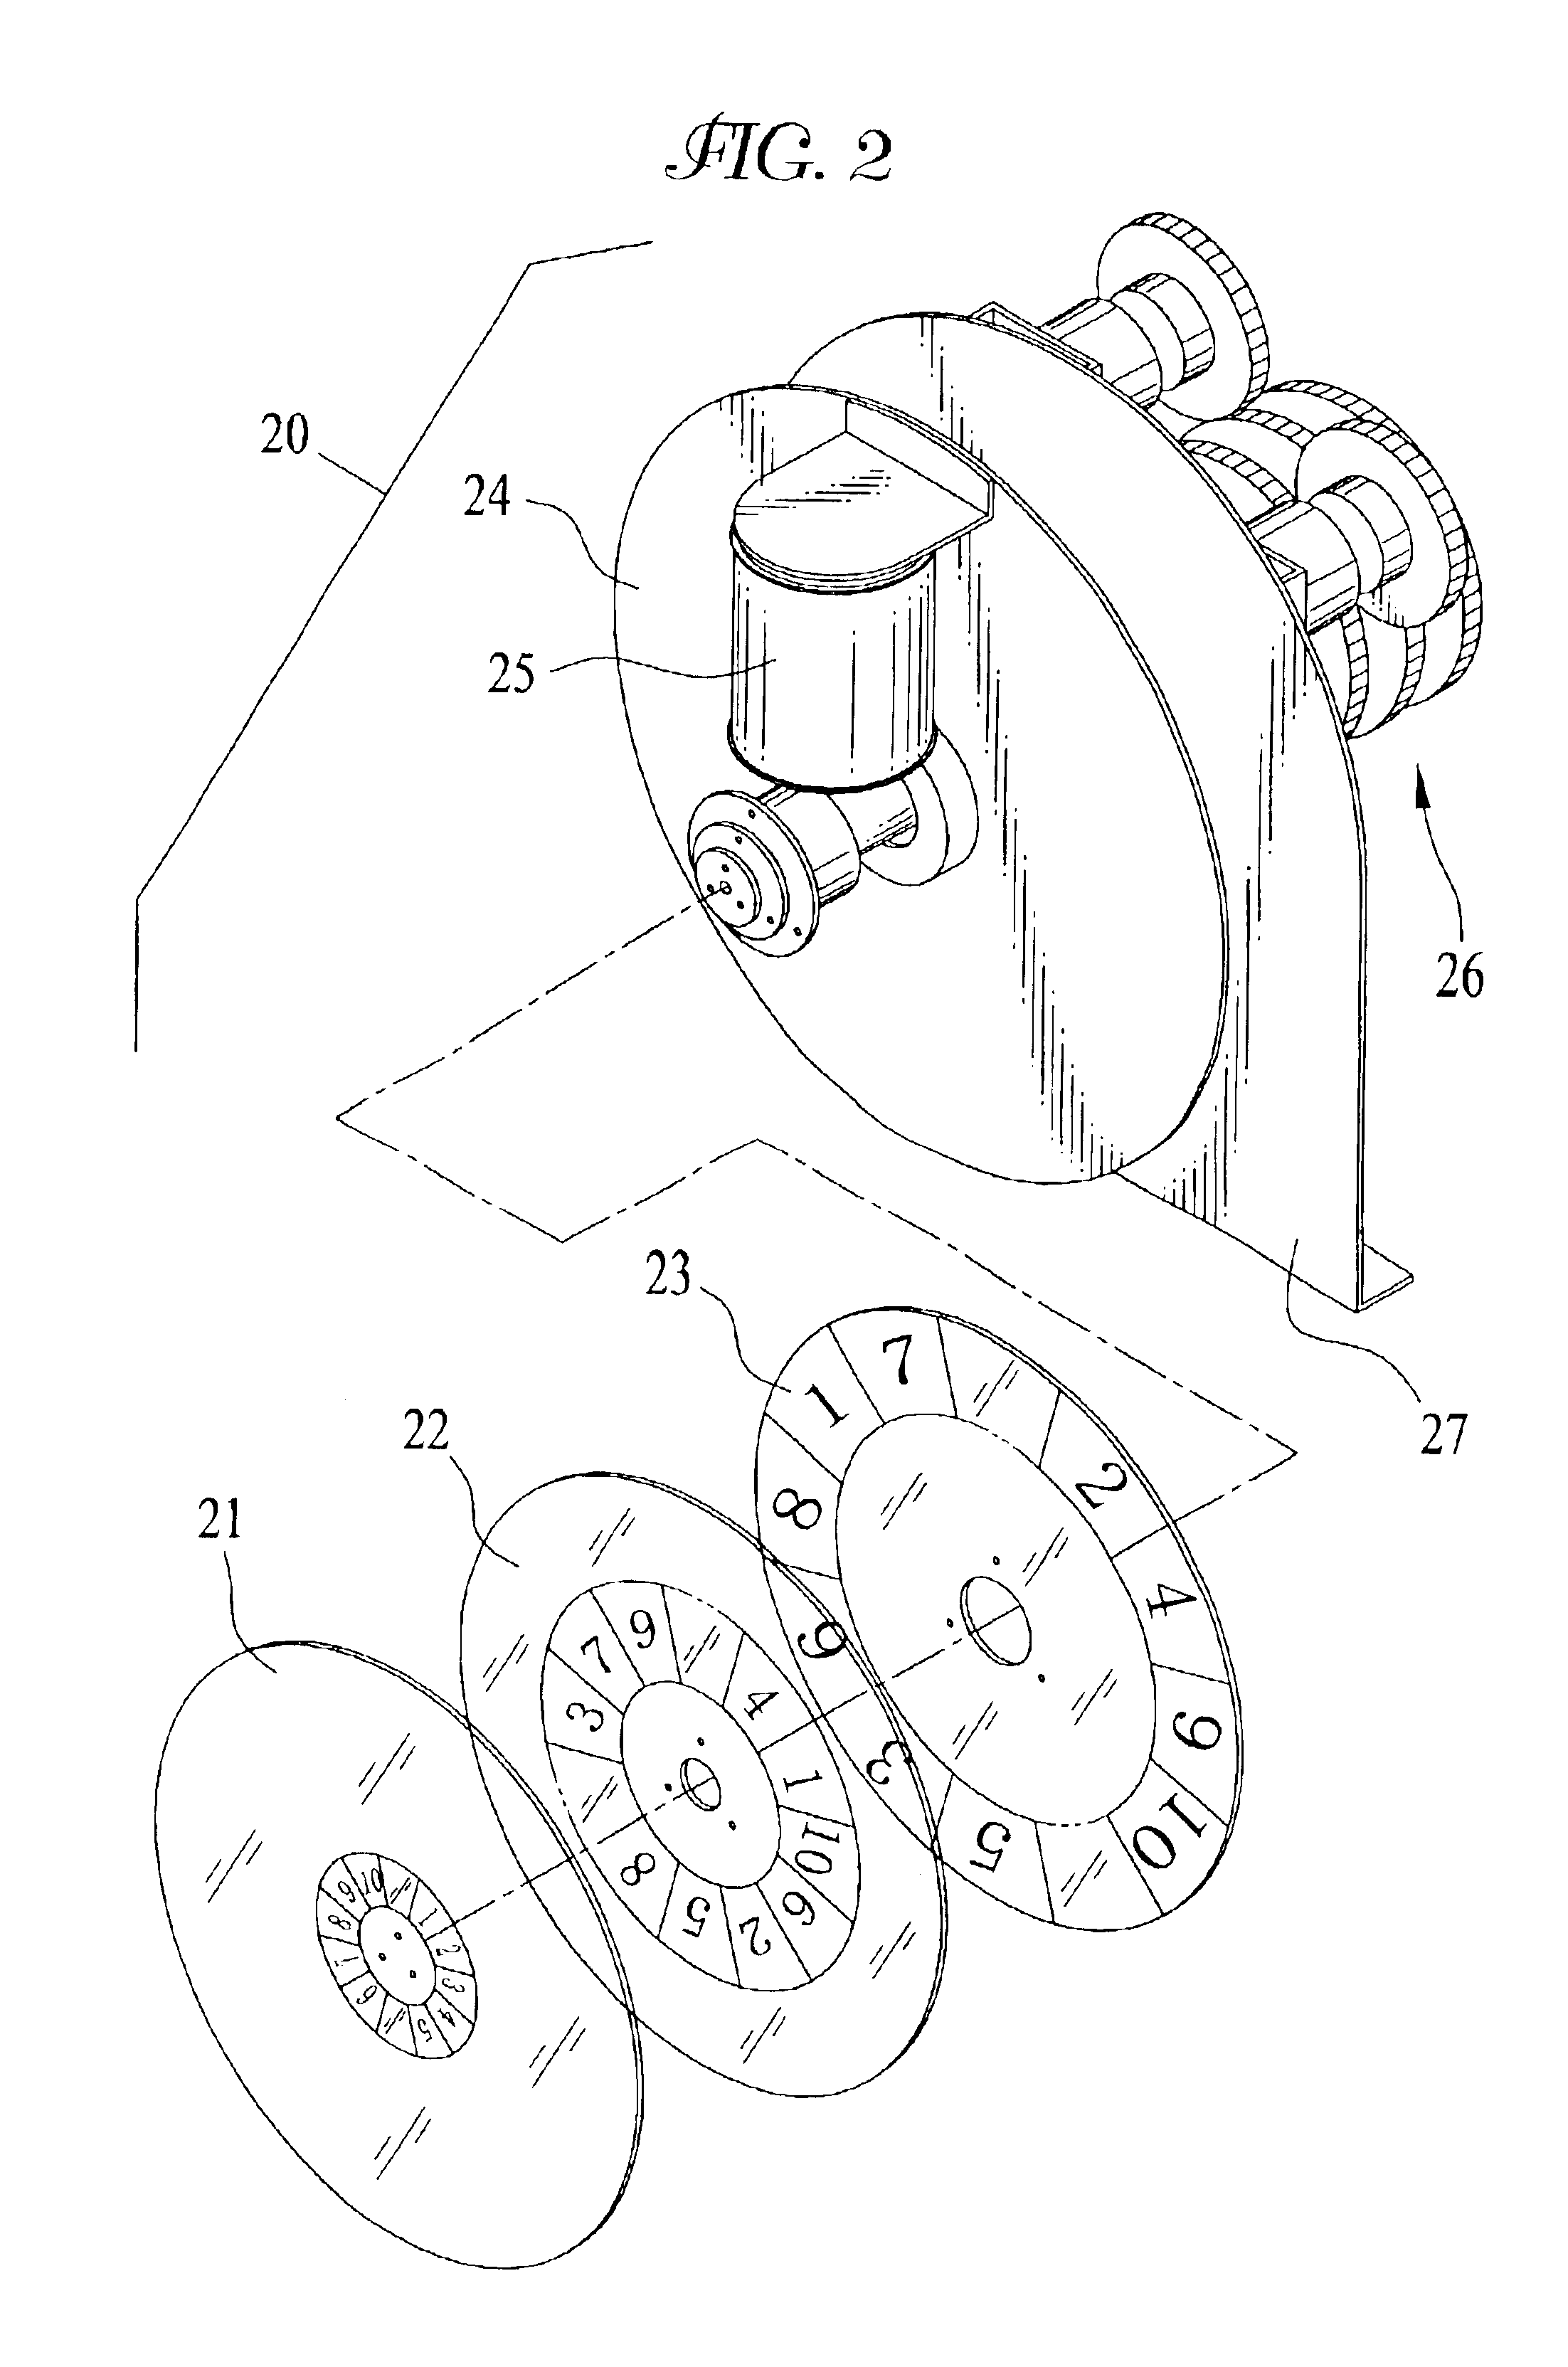 Symbol display device for game machine